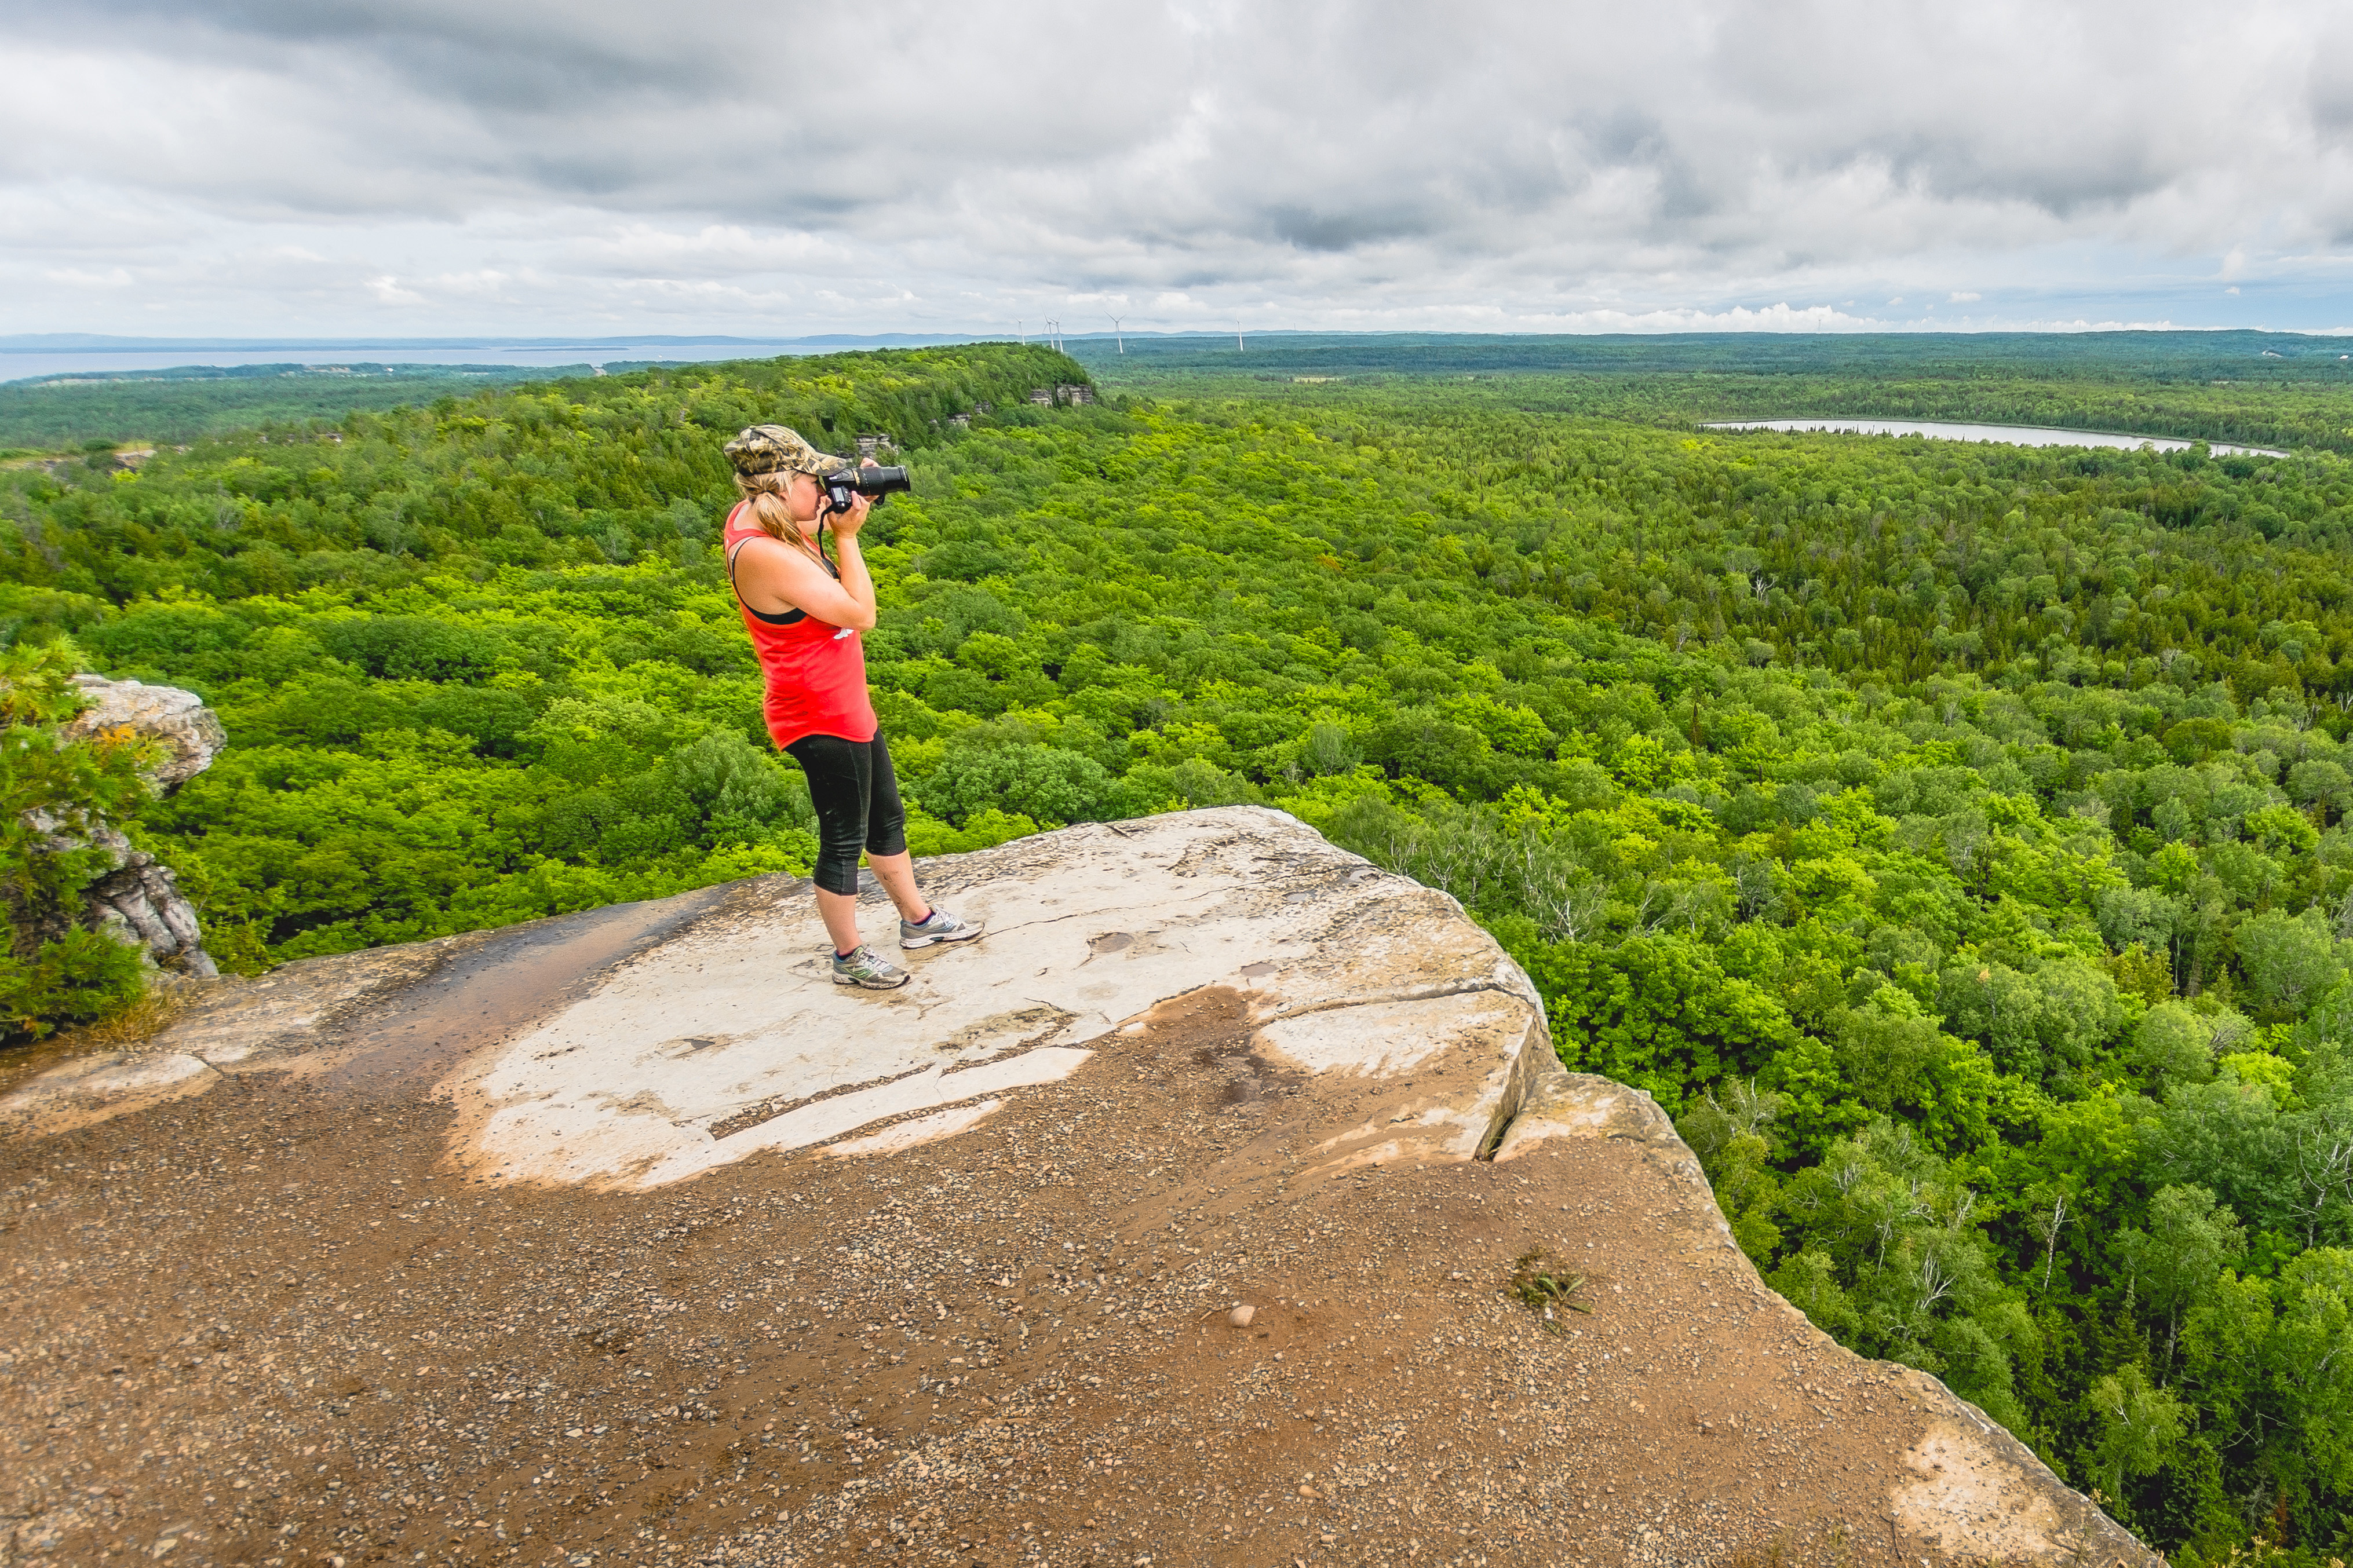 The Cup and Saucer: The highest point on Manitoulin Island